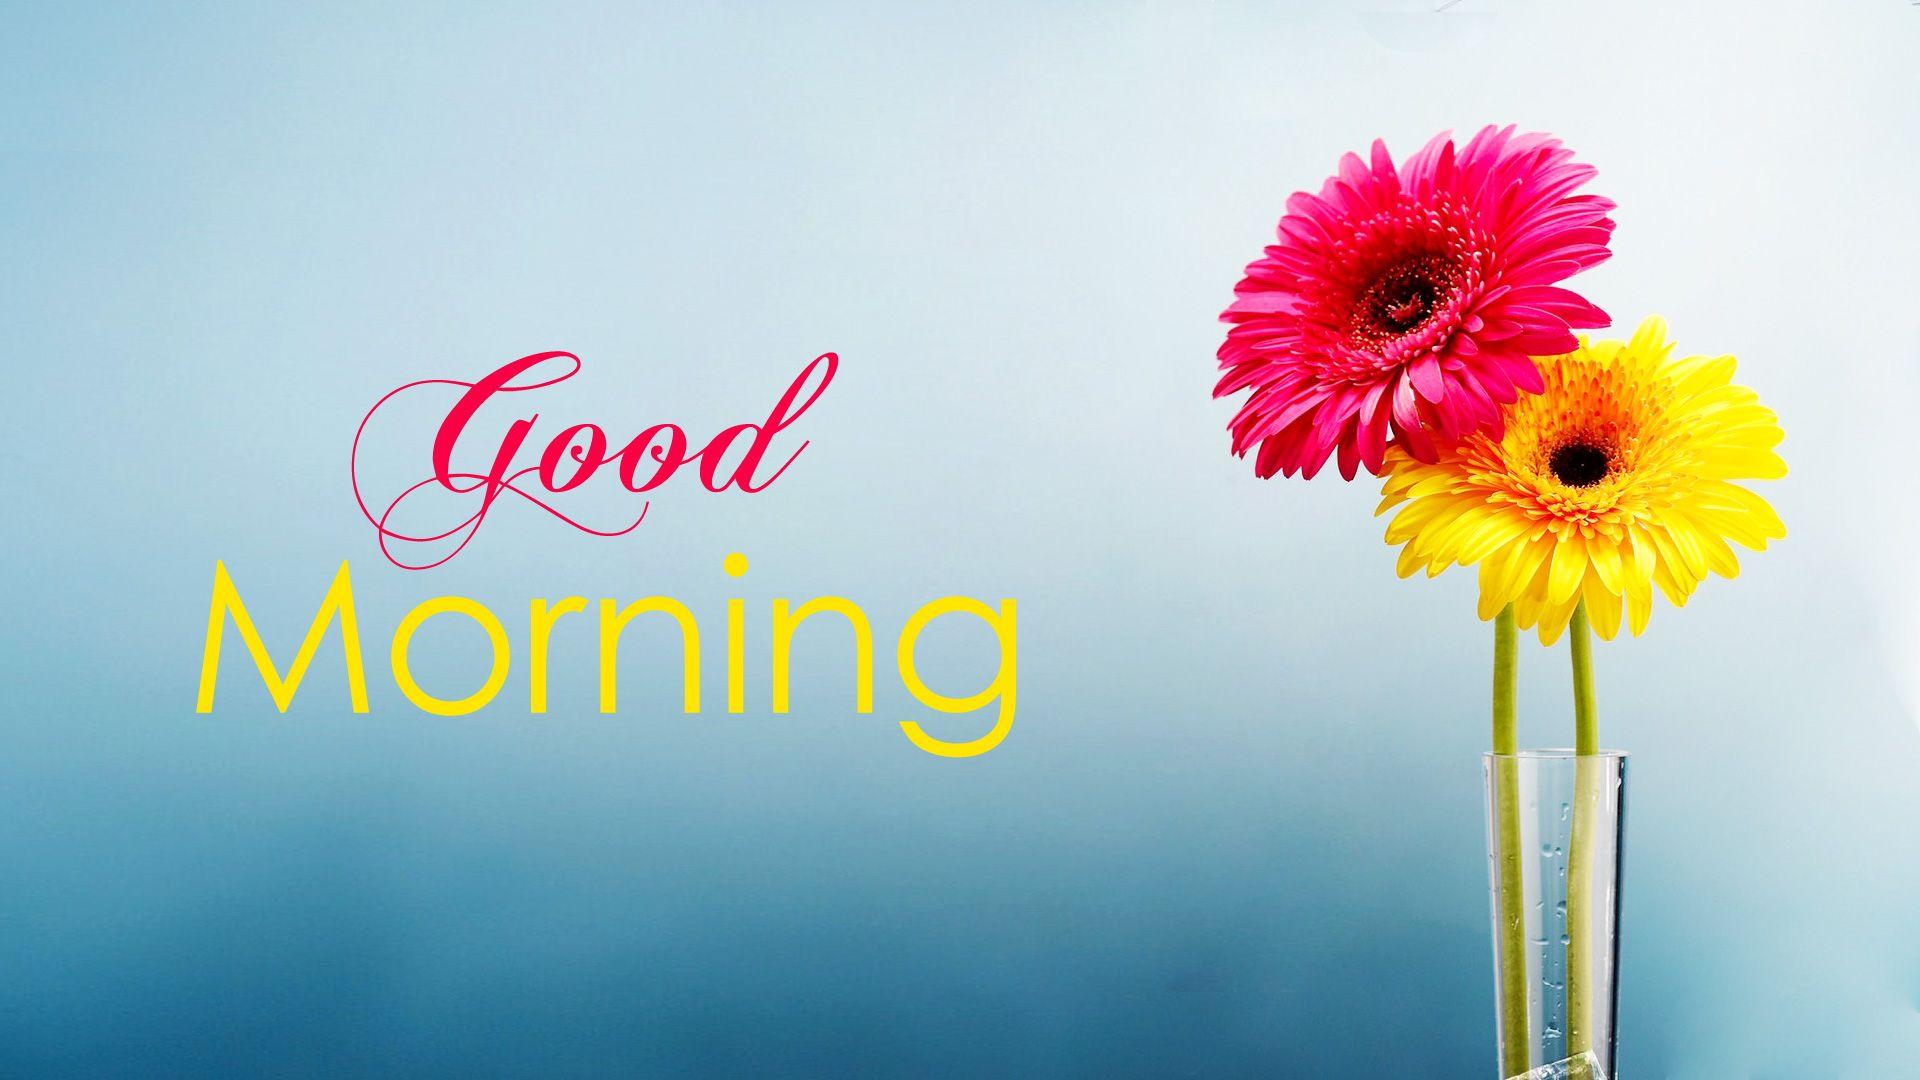 Good Morning Wallpapers with Flowers, Full HD 1920x1080 GM Image